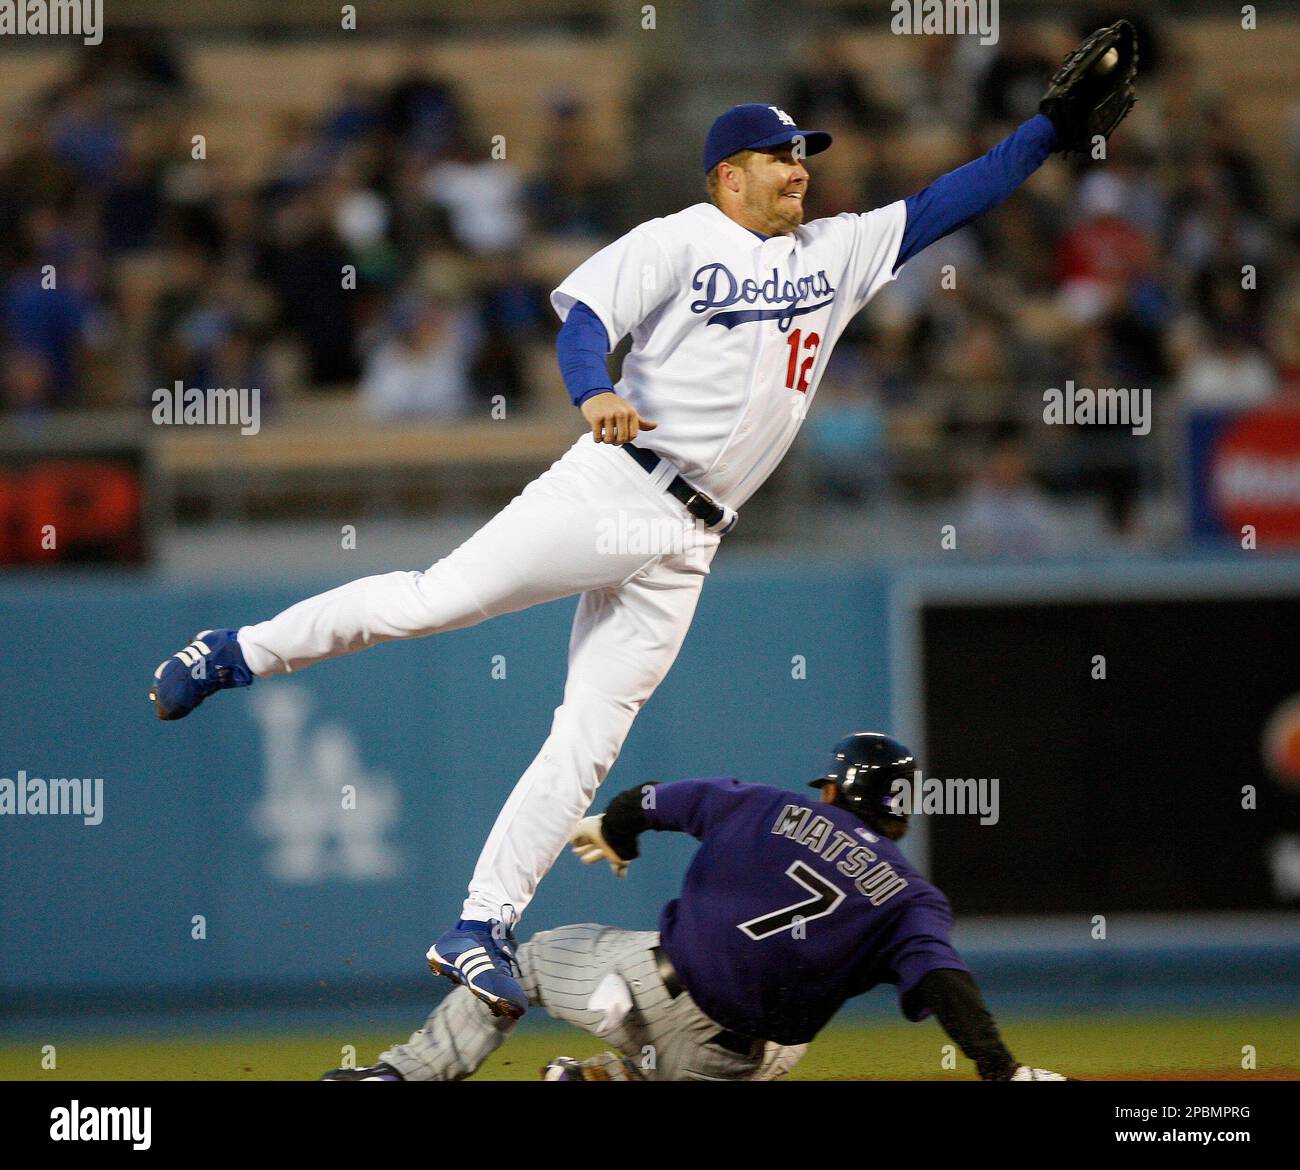 Los Angeles Dodgers second baseman Jeff Kent (12) stretches to catch the  high throw from catcher Russell Martin as Colorado Rockies' Kazuo Matsui,  of Japan, steals second base during the first inning